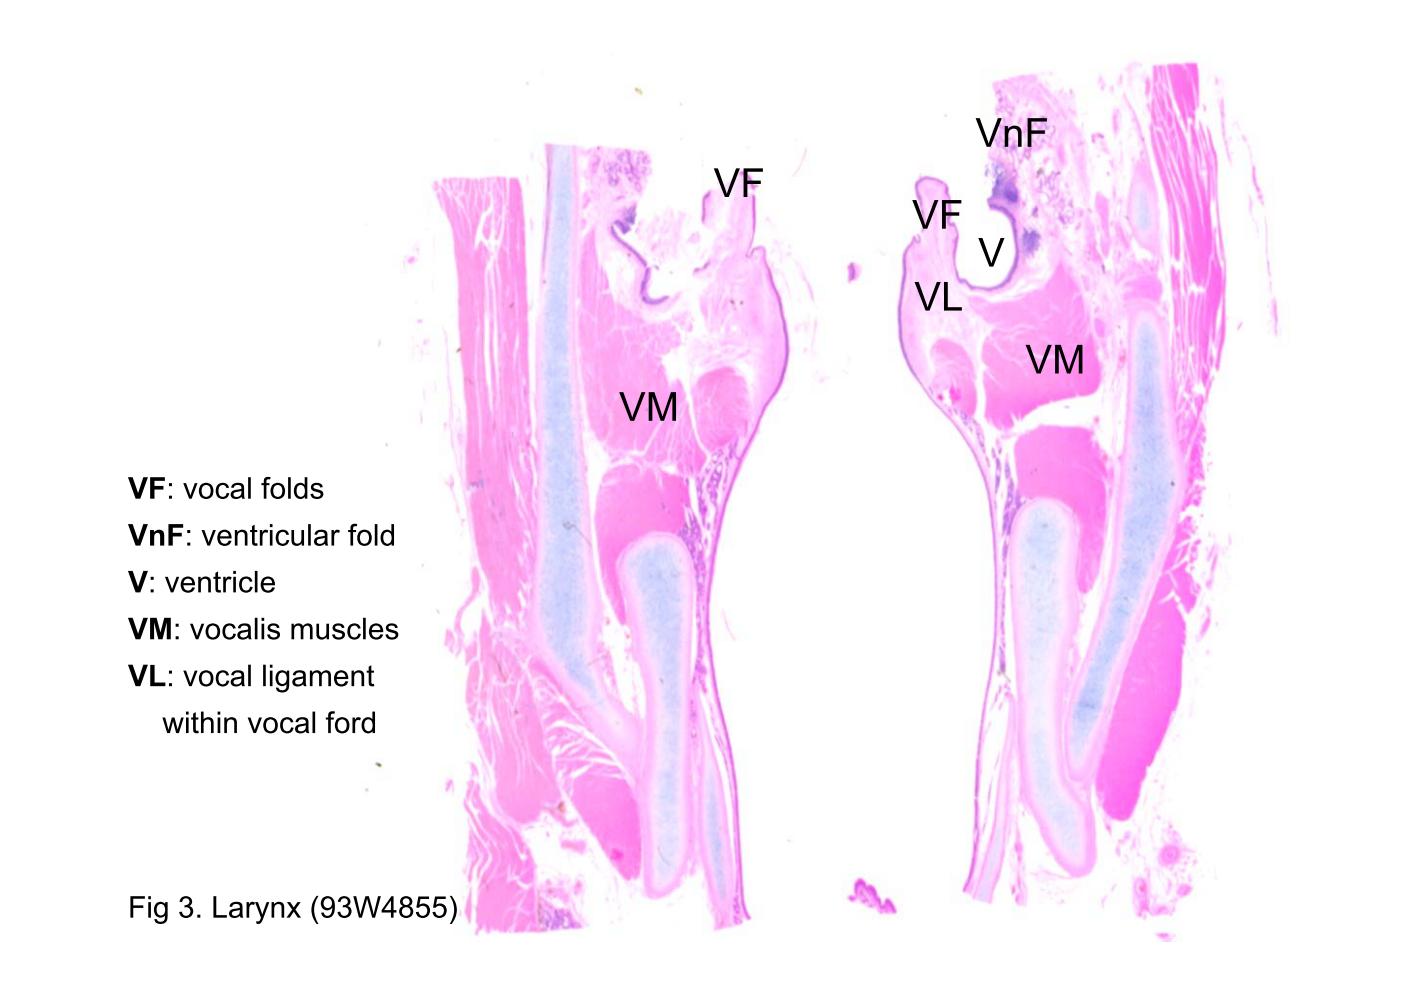 block9_09.jpg - Fig 3. Larynx (93W4855)The two vocal folds (VF) and the space between them constitute the glottis. Just above each vocal fold is an elongated recess called the ventricle (V), and above the ventricle is another ridge called the ventricular fold (VnF) or, sometimes, the false vocal fold. Below and lateral to the vocal folds are the vocalis muscles (VM). The elastic material is a component of the vocal ligament (VL).